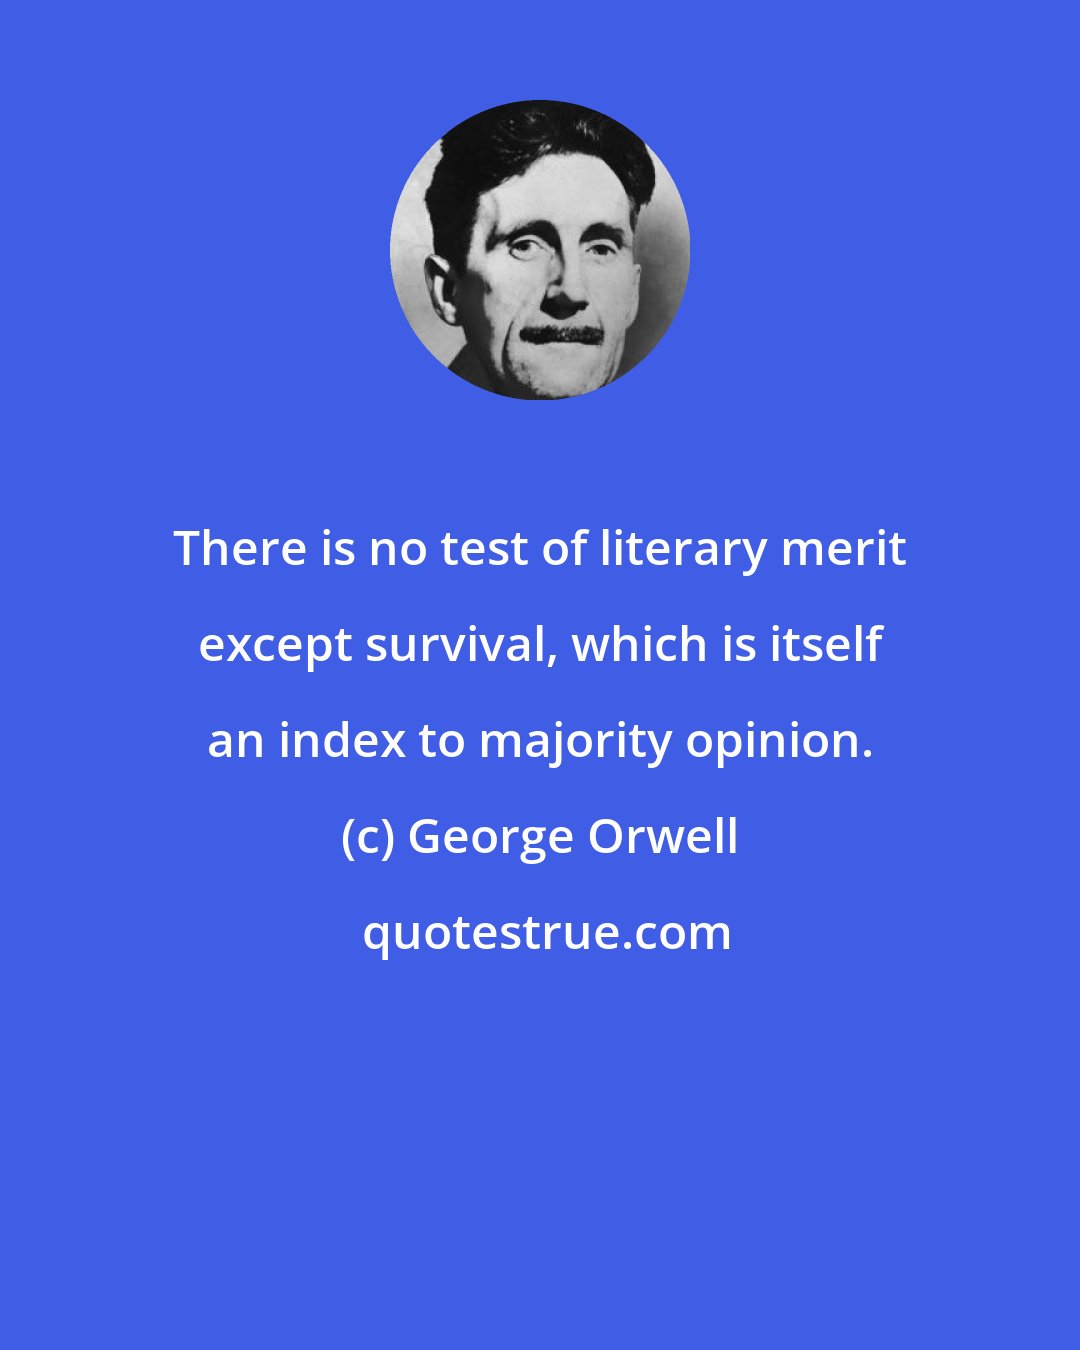 George Orwell: There is no test of literary merit except survival, which is itself an index to majority opinion.